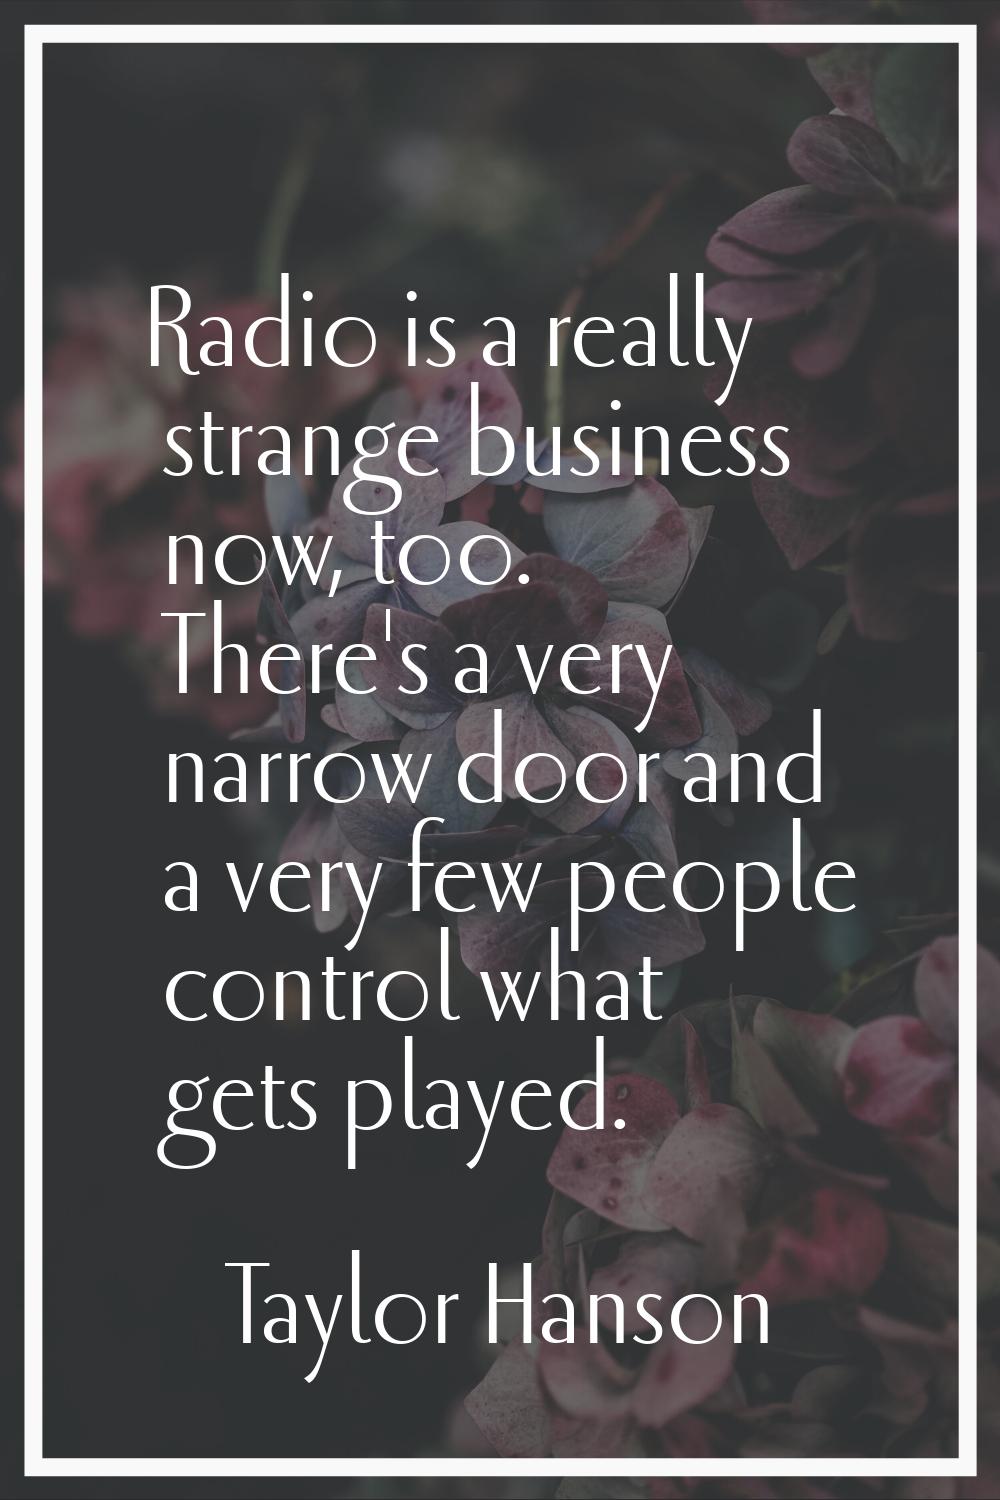 Radio is a really strange business now, too. There's a very narrow door and a very few people contr